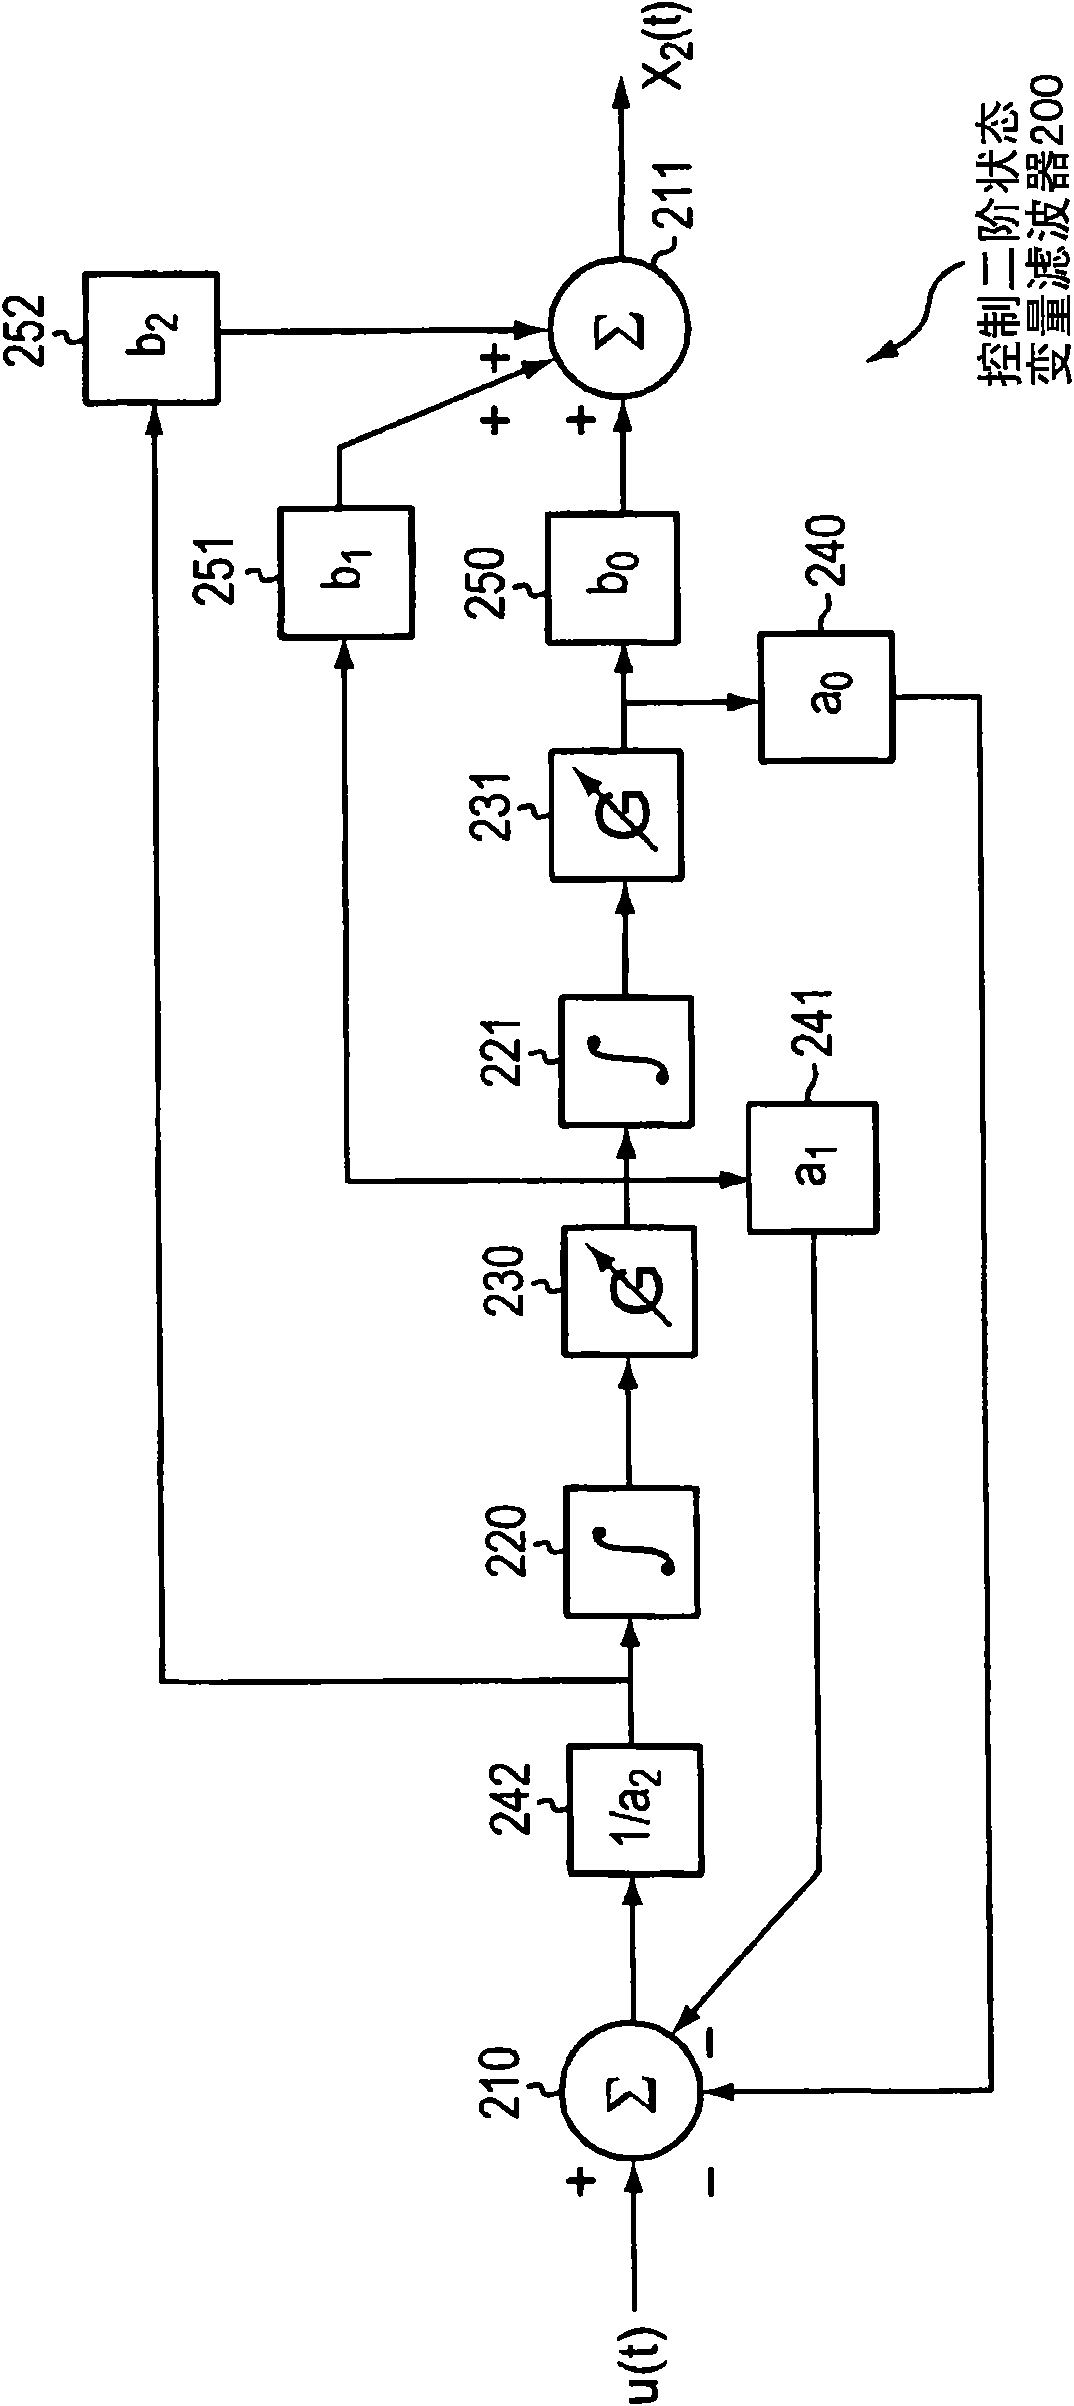 Method, system, and apparatus for wideband signal processeing